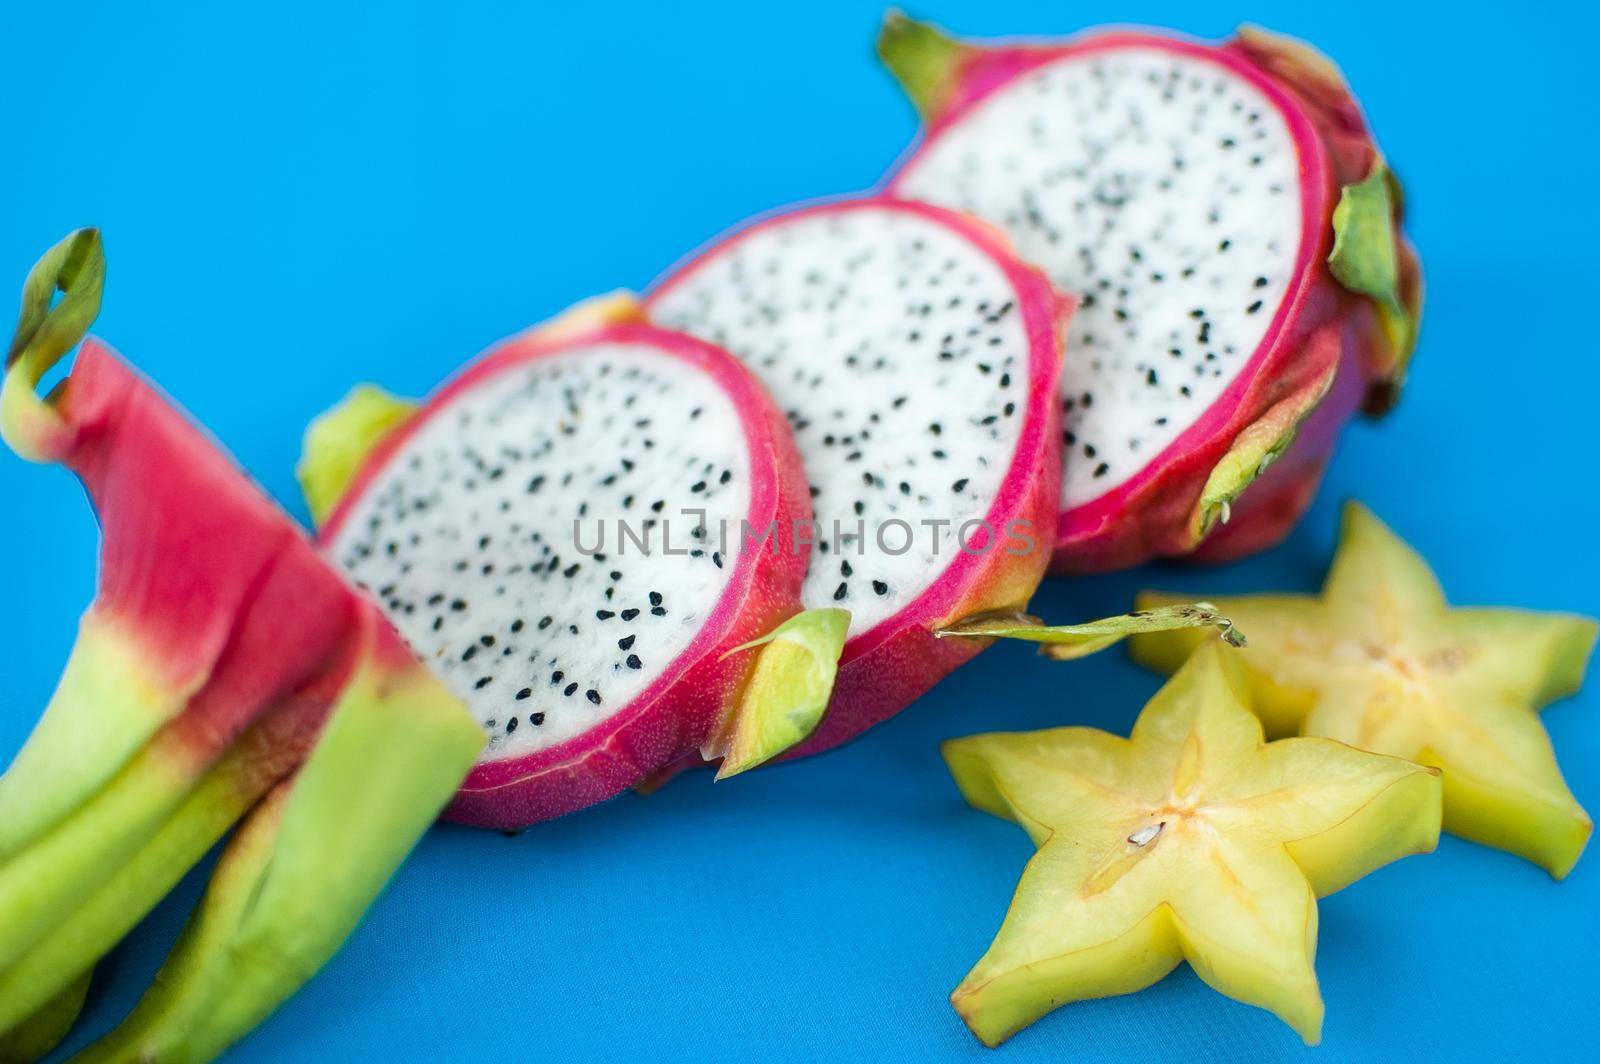 Slices of dragon fruit or pitaya with pink skin and white pulp with black seeds on blue background. Exotic fruits, healthy eating concept by balinska_lv